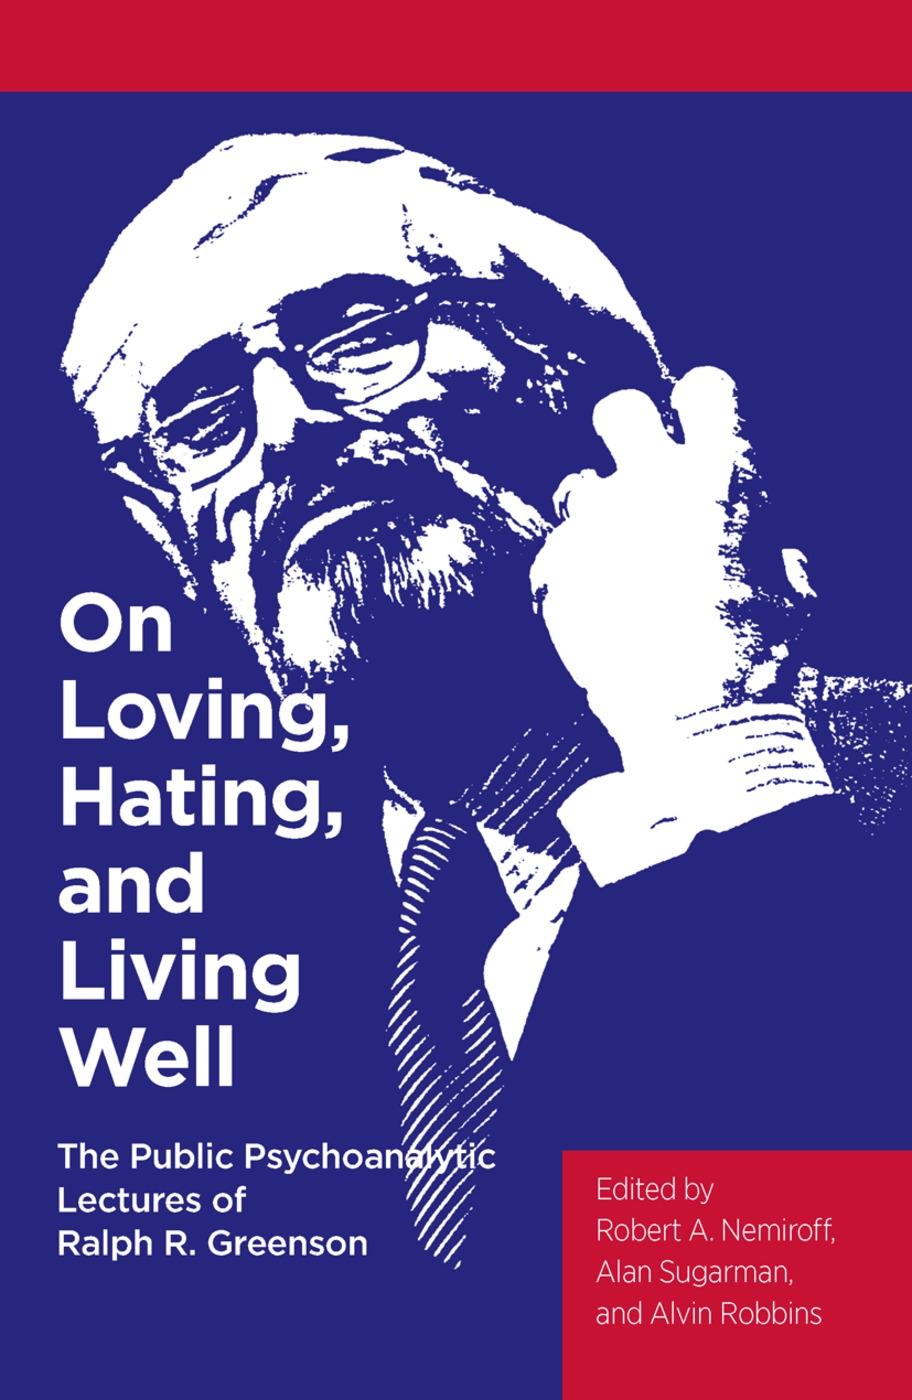 On Loving, Hating, and Living Well: The Public Psychoanalytic Lectures of Ralph R. Greenson